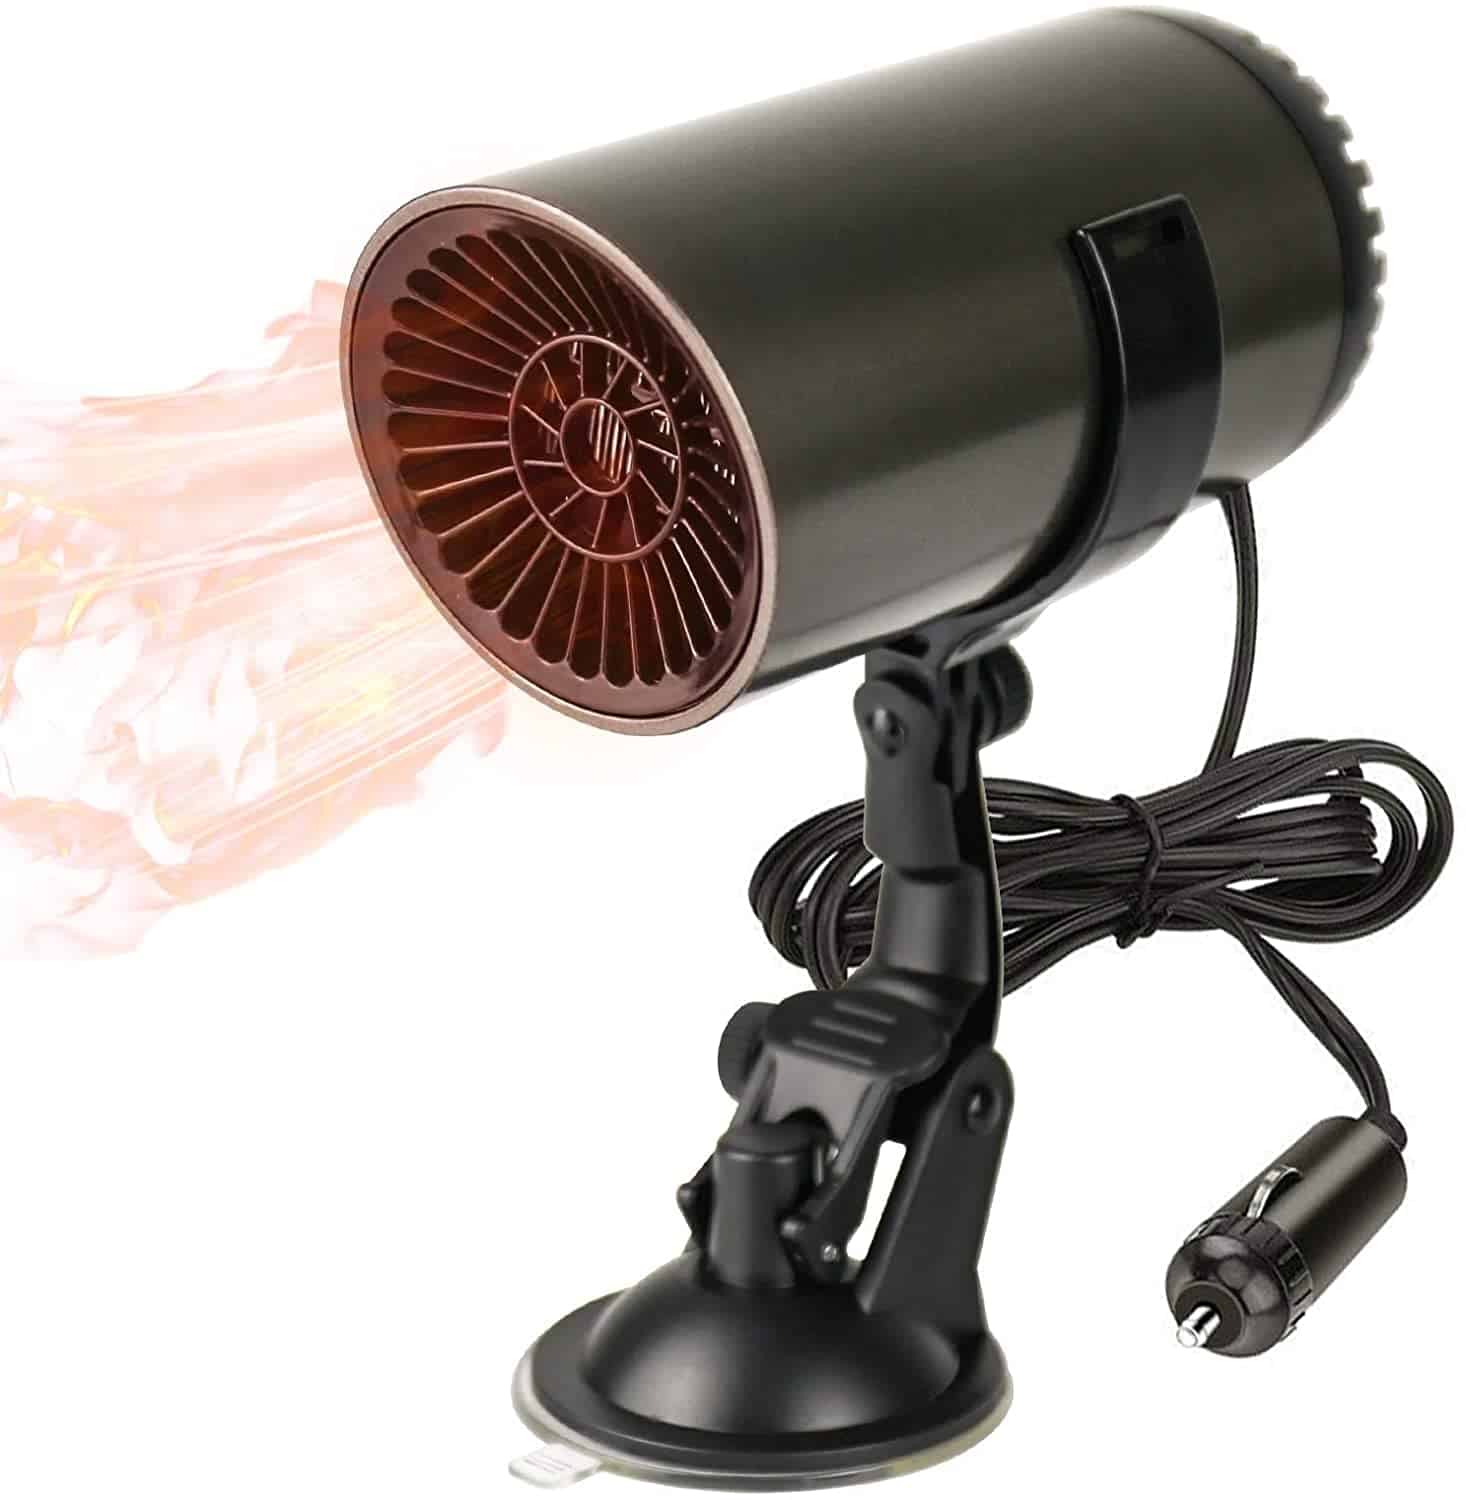 Top 10 Best Portable Car Heaters Reviews and Buying Guide IndoorBreathing